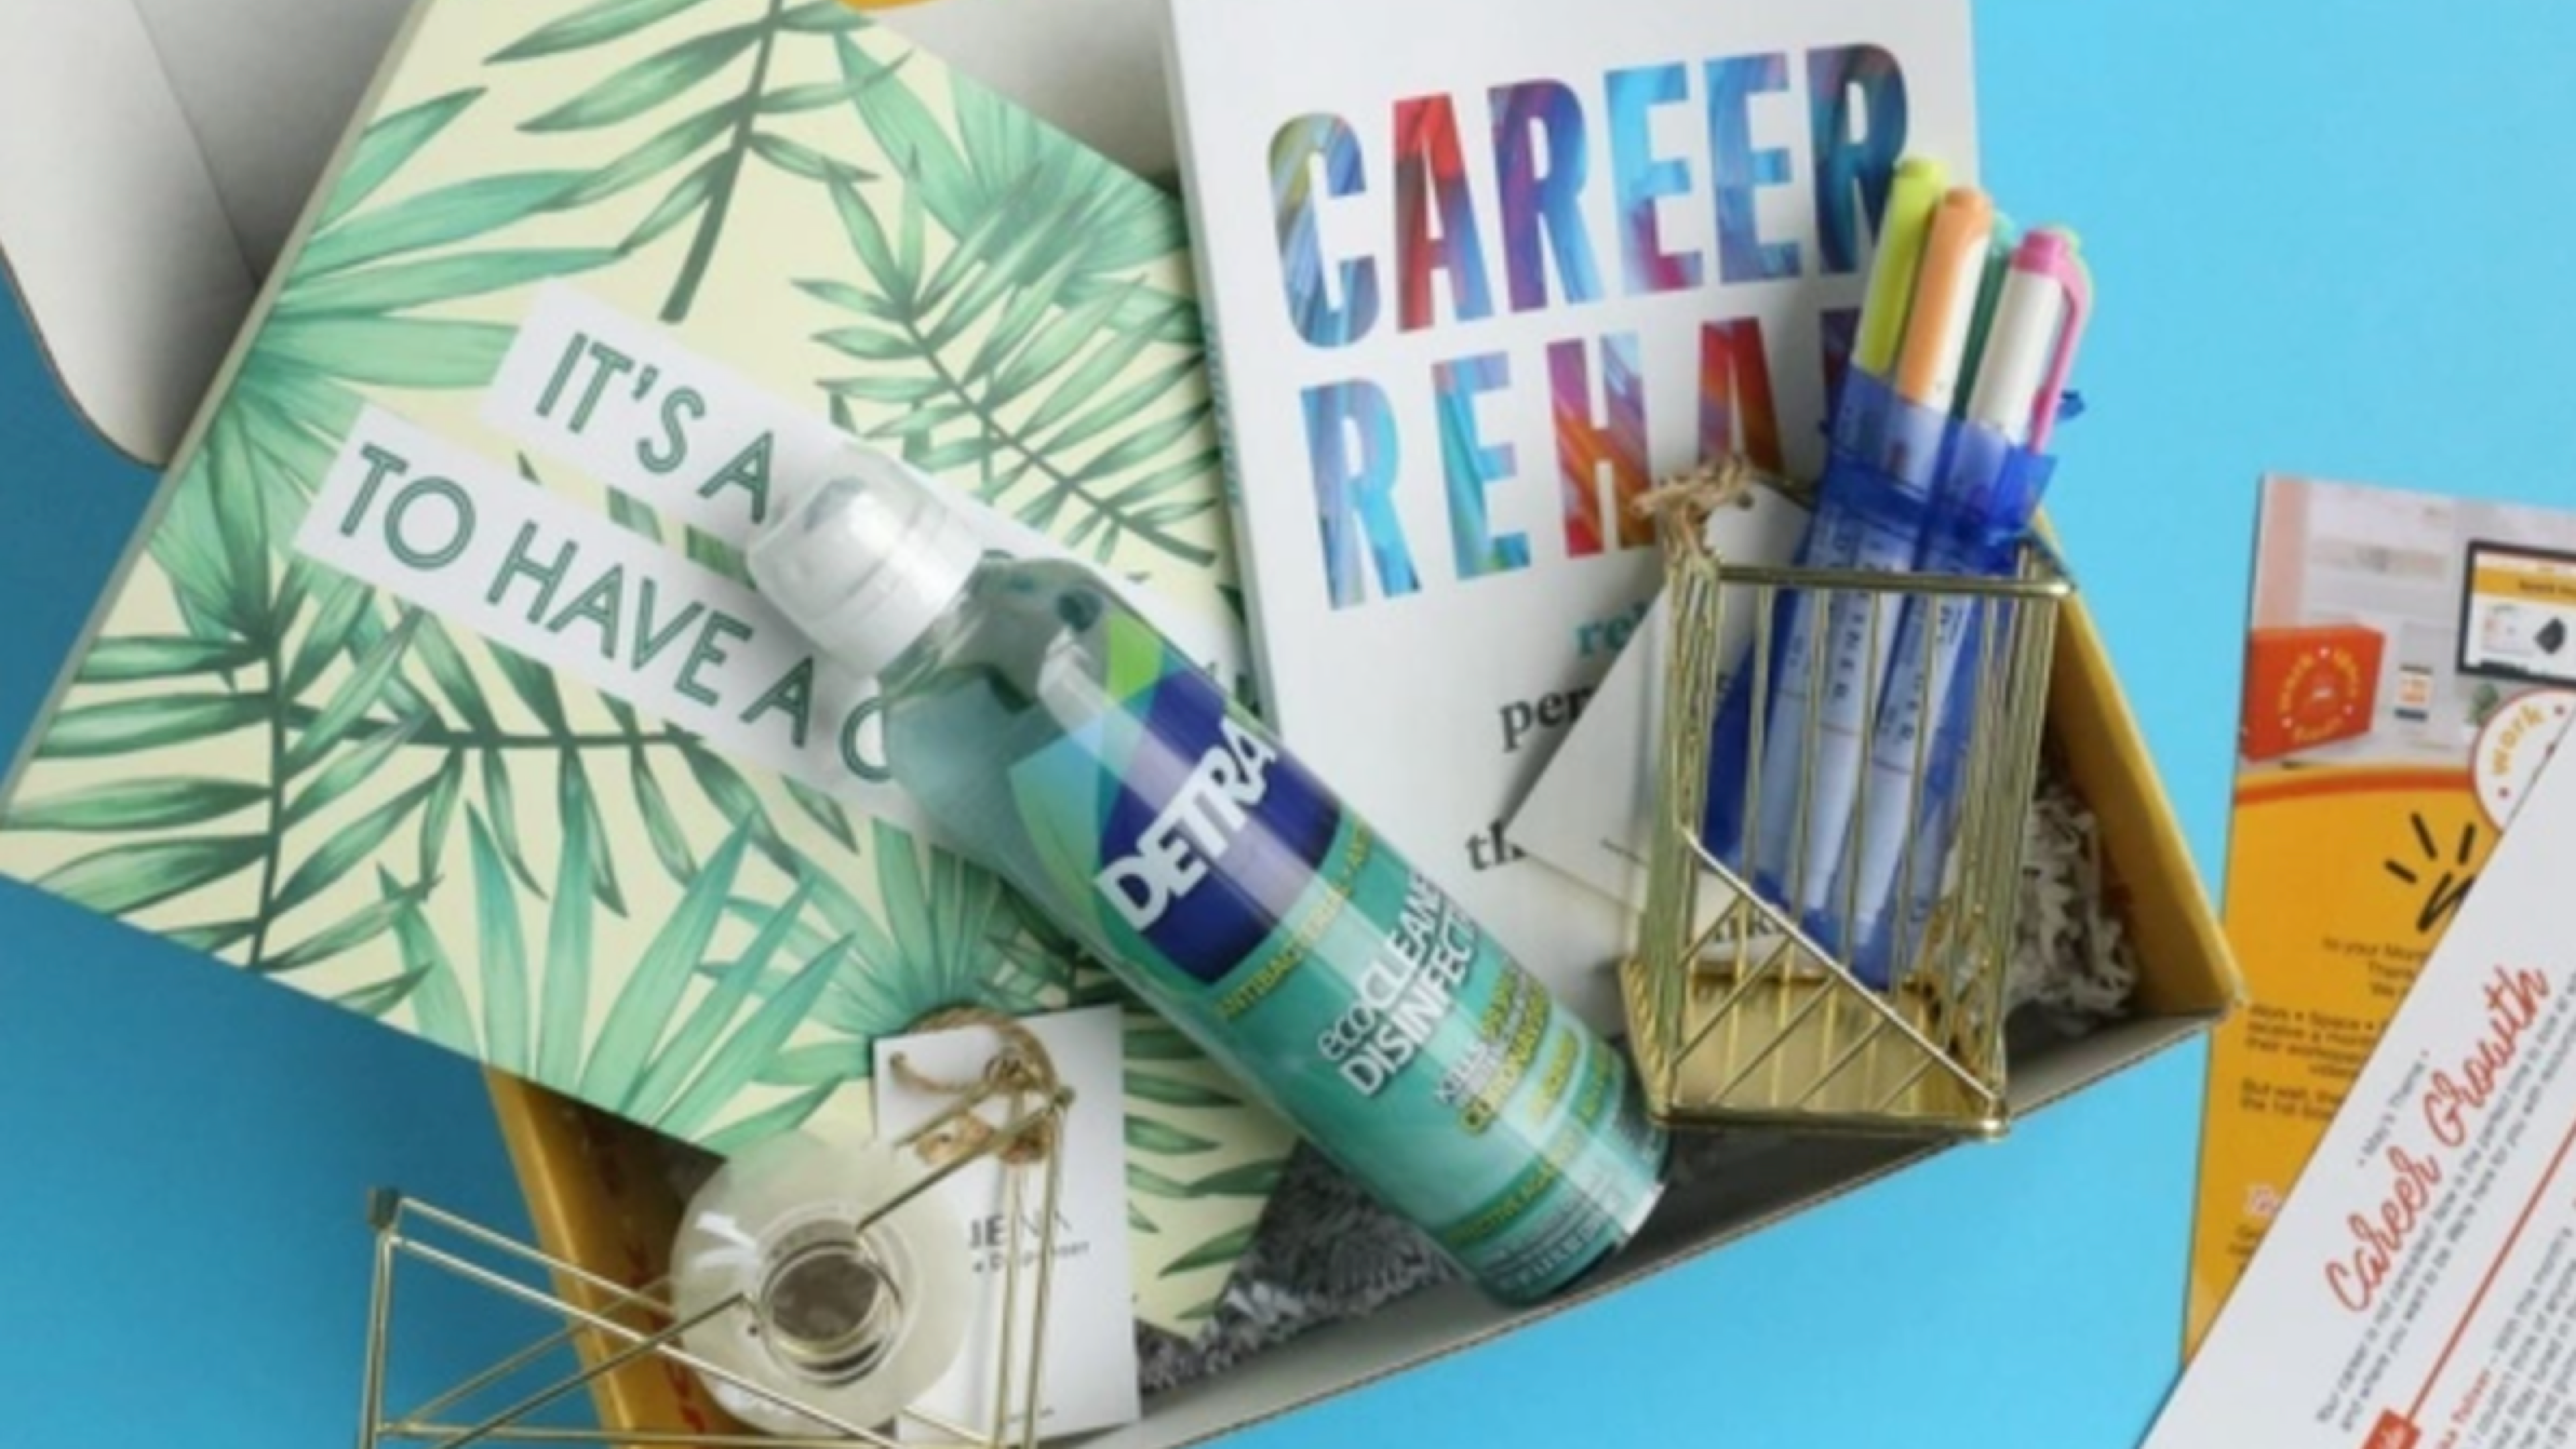 career-focused subscription box with monthly shipments to decorate your home office and provide career advice